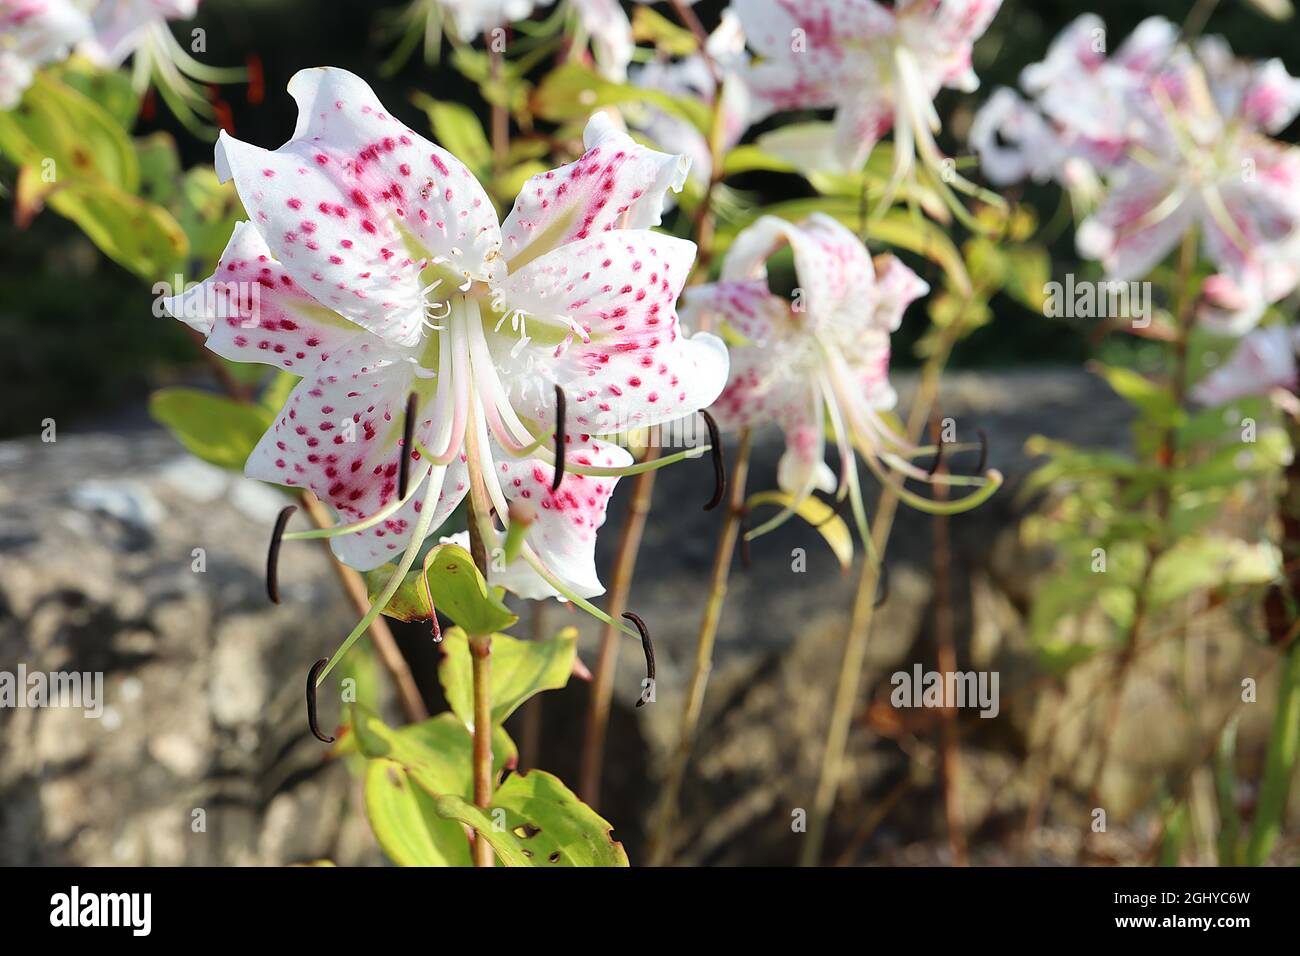 Lilium speciosum var rubrum showy lily – white flowers with deep pink spots and reflexed petals,  August, England, UK Stock Photo